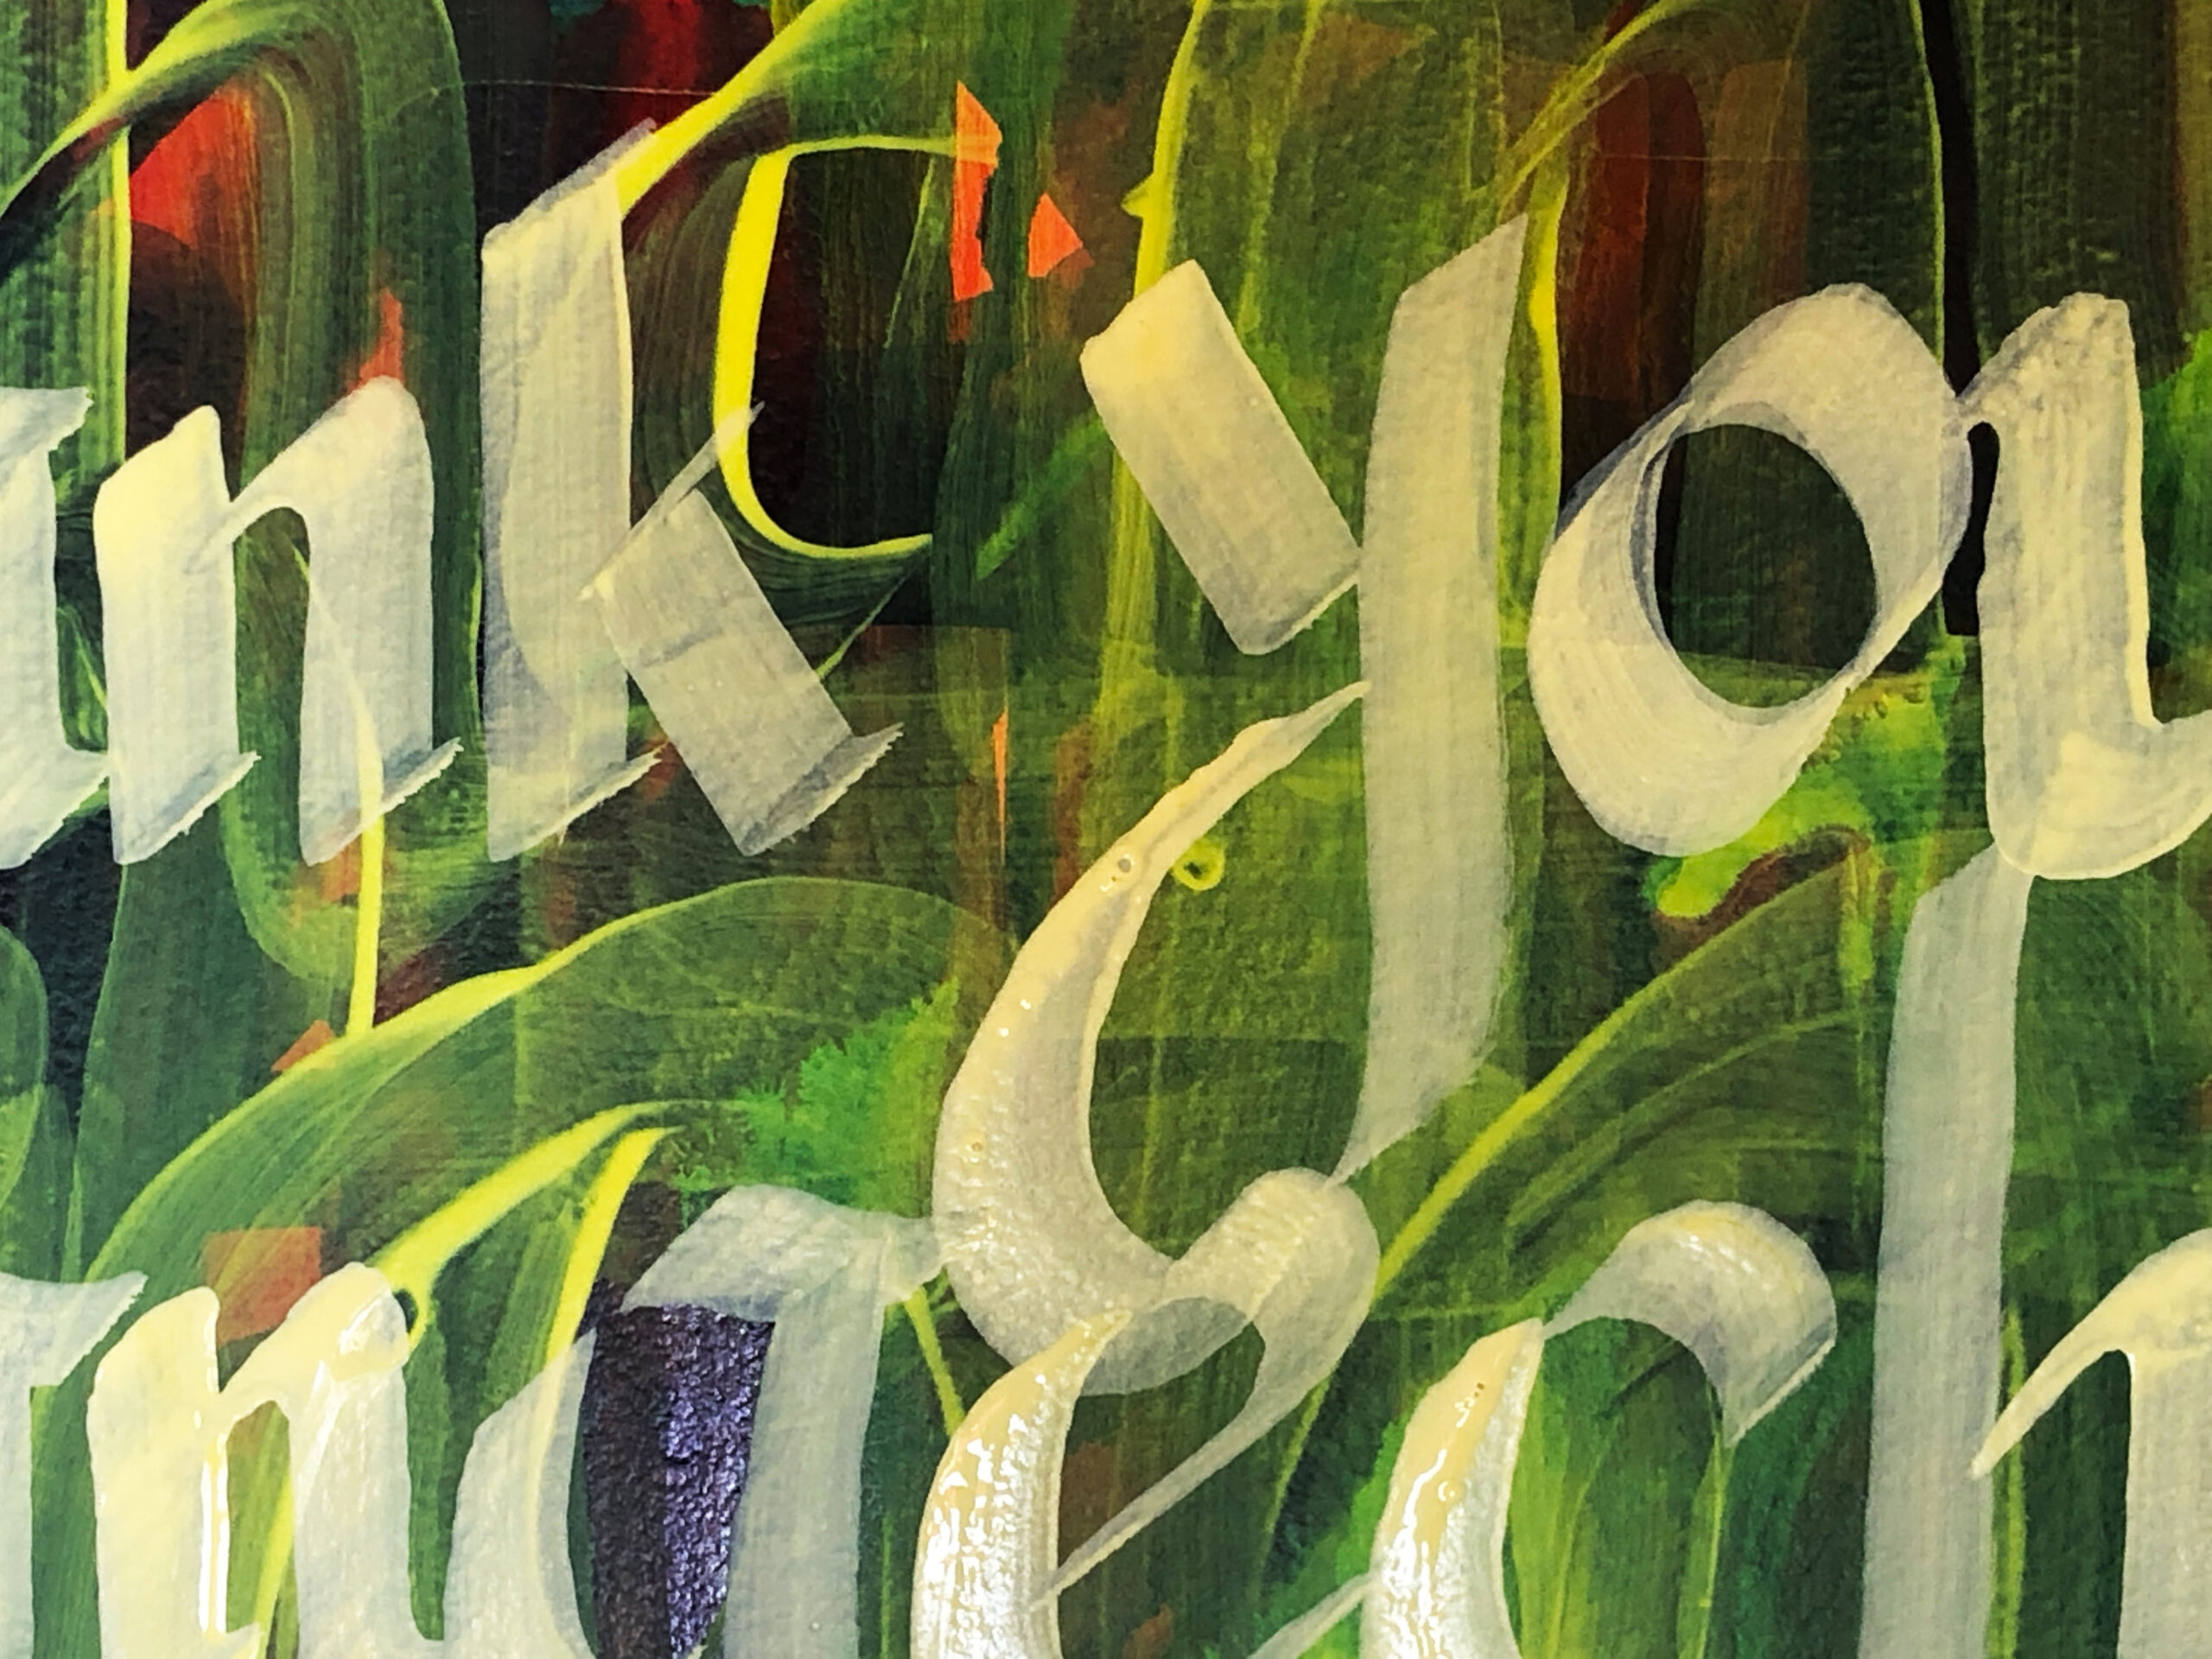 A dark field of green with pale yellow brushstrokes shows many letters overlapping and intertwining with each other. 